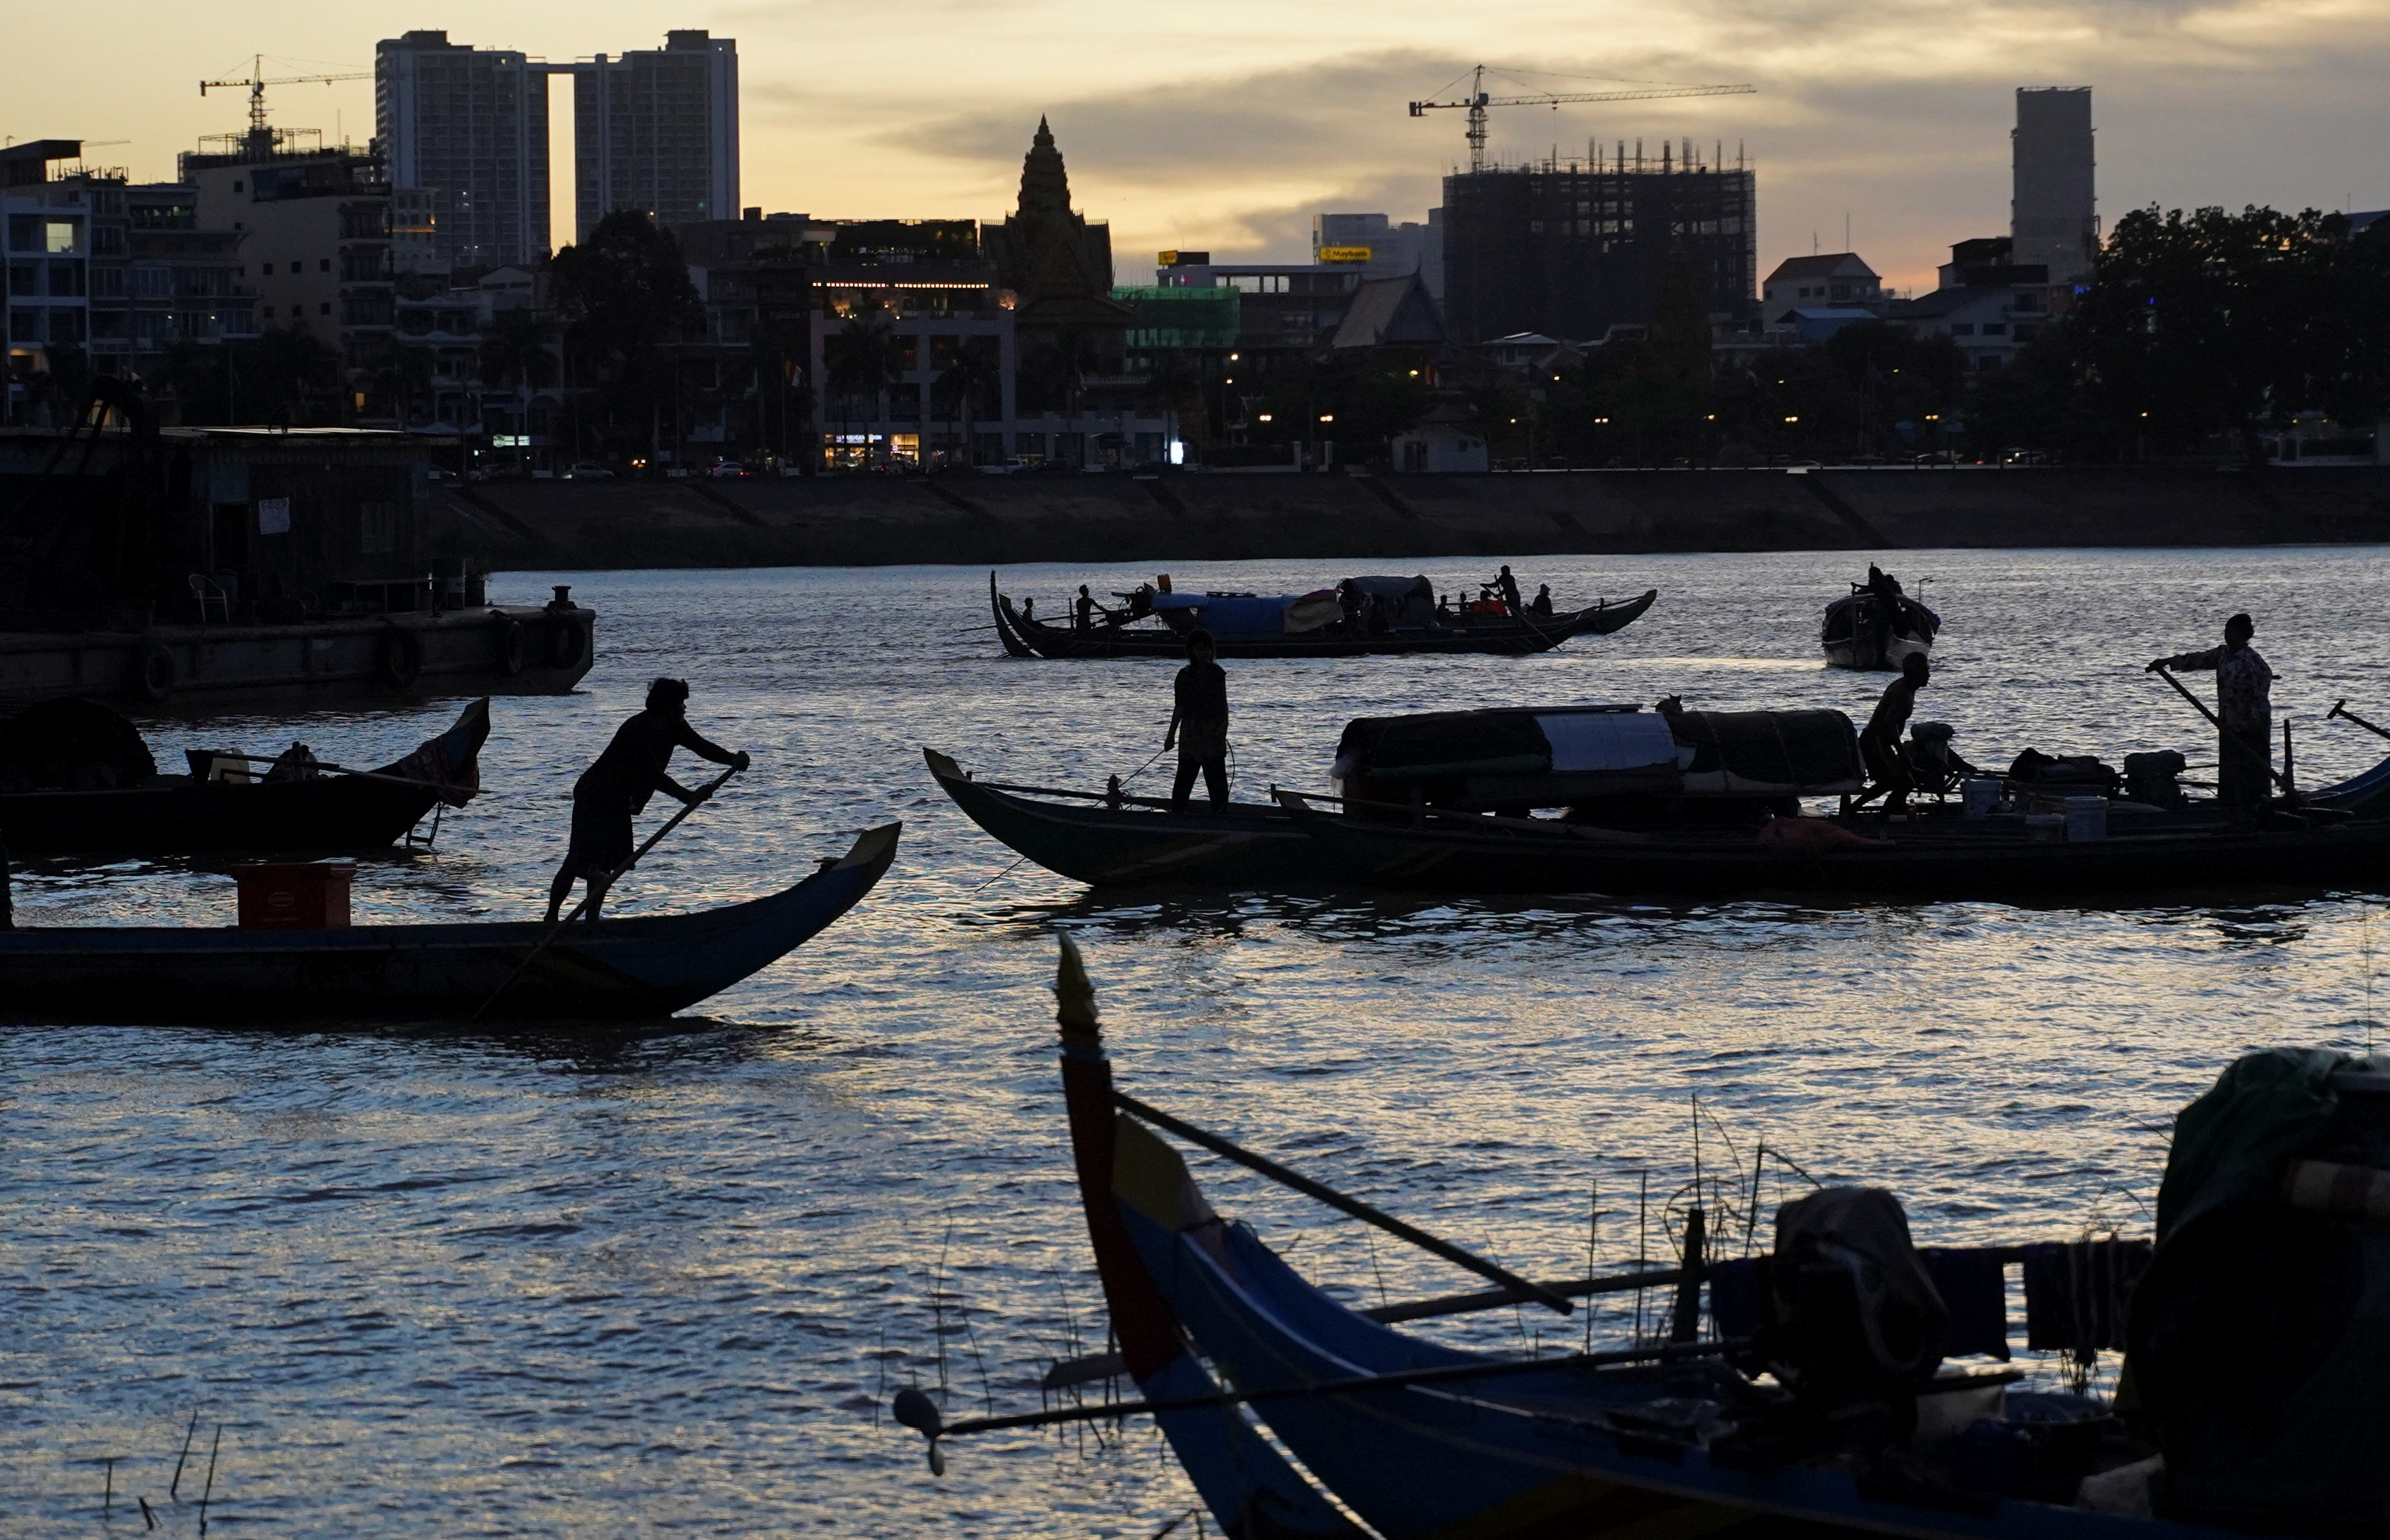 Fishing boats are seen on the Tonle Sap River in Phnom Penh